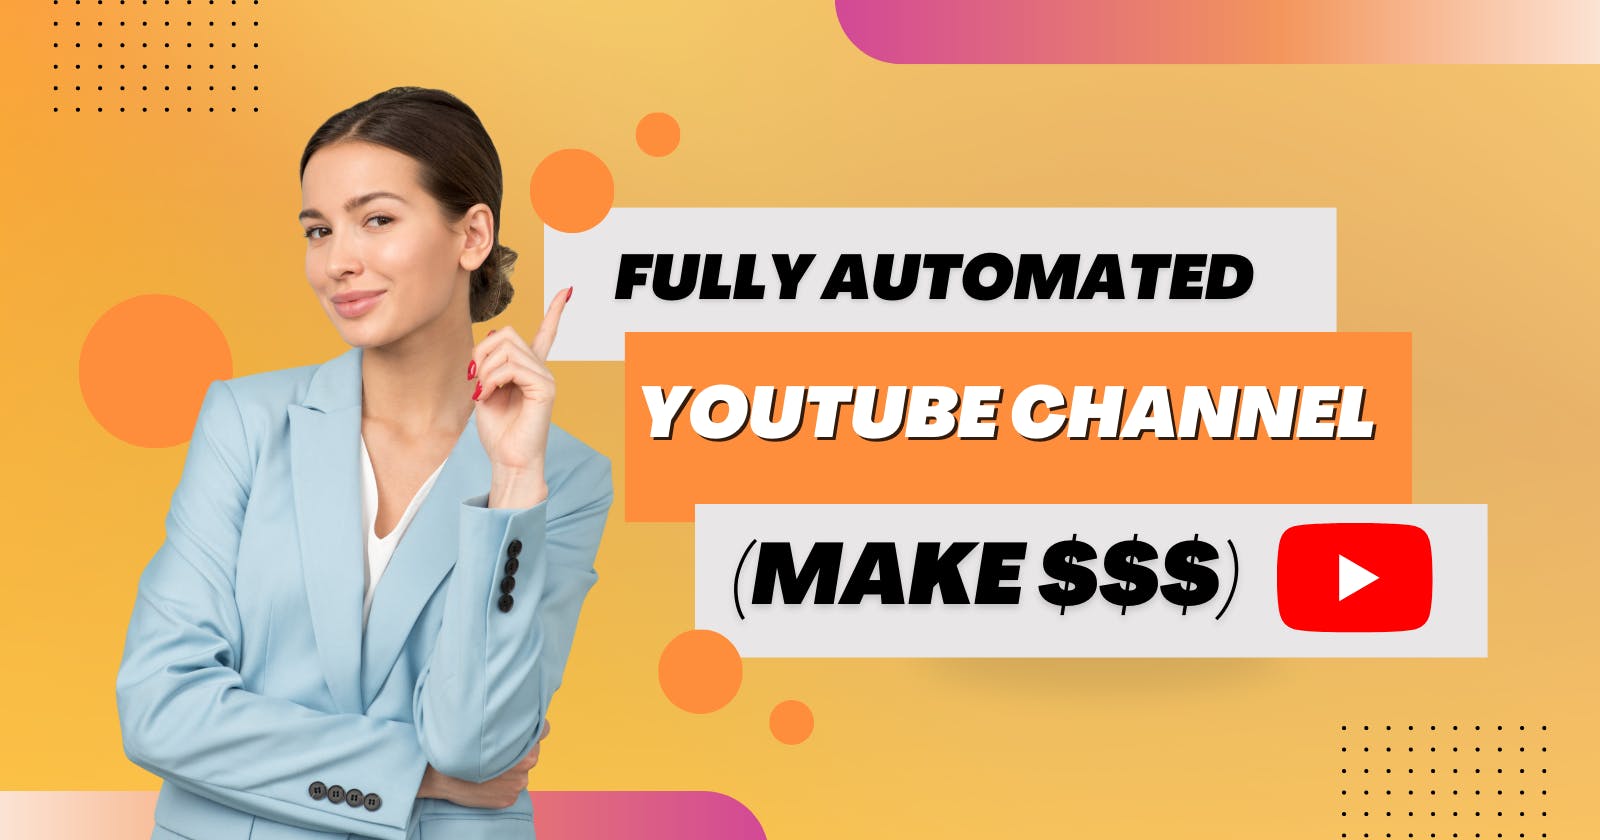 How To Make A Fully Automated Youtube Channel (Make $$$)